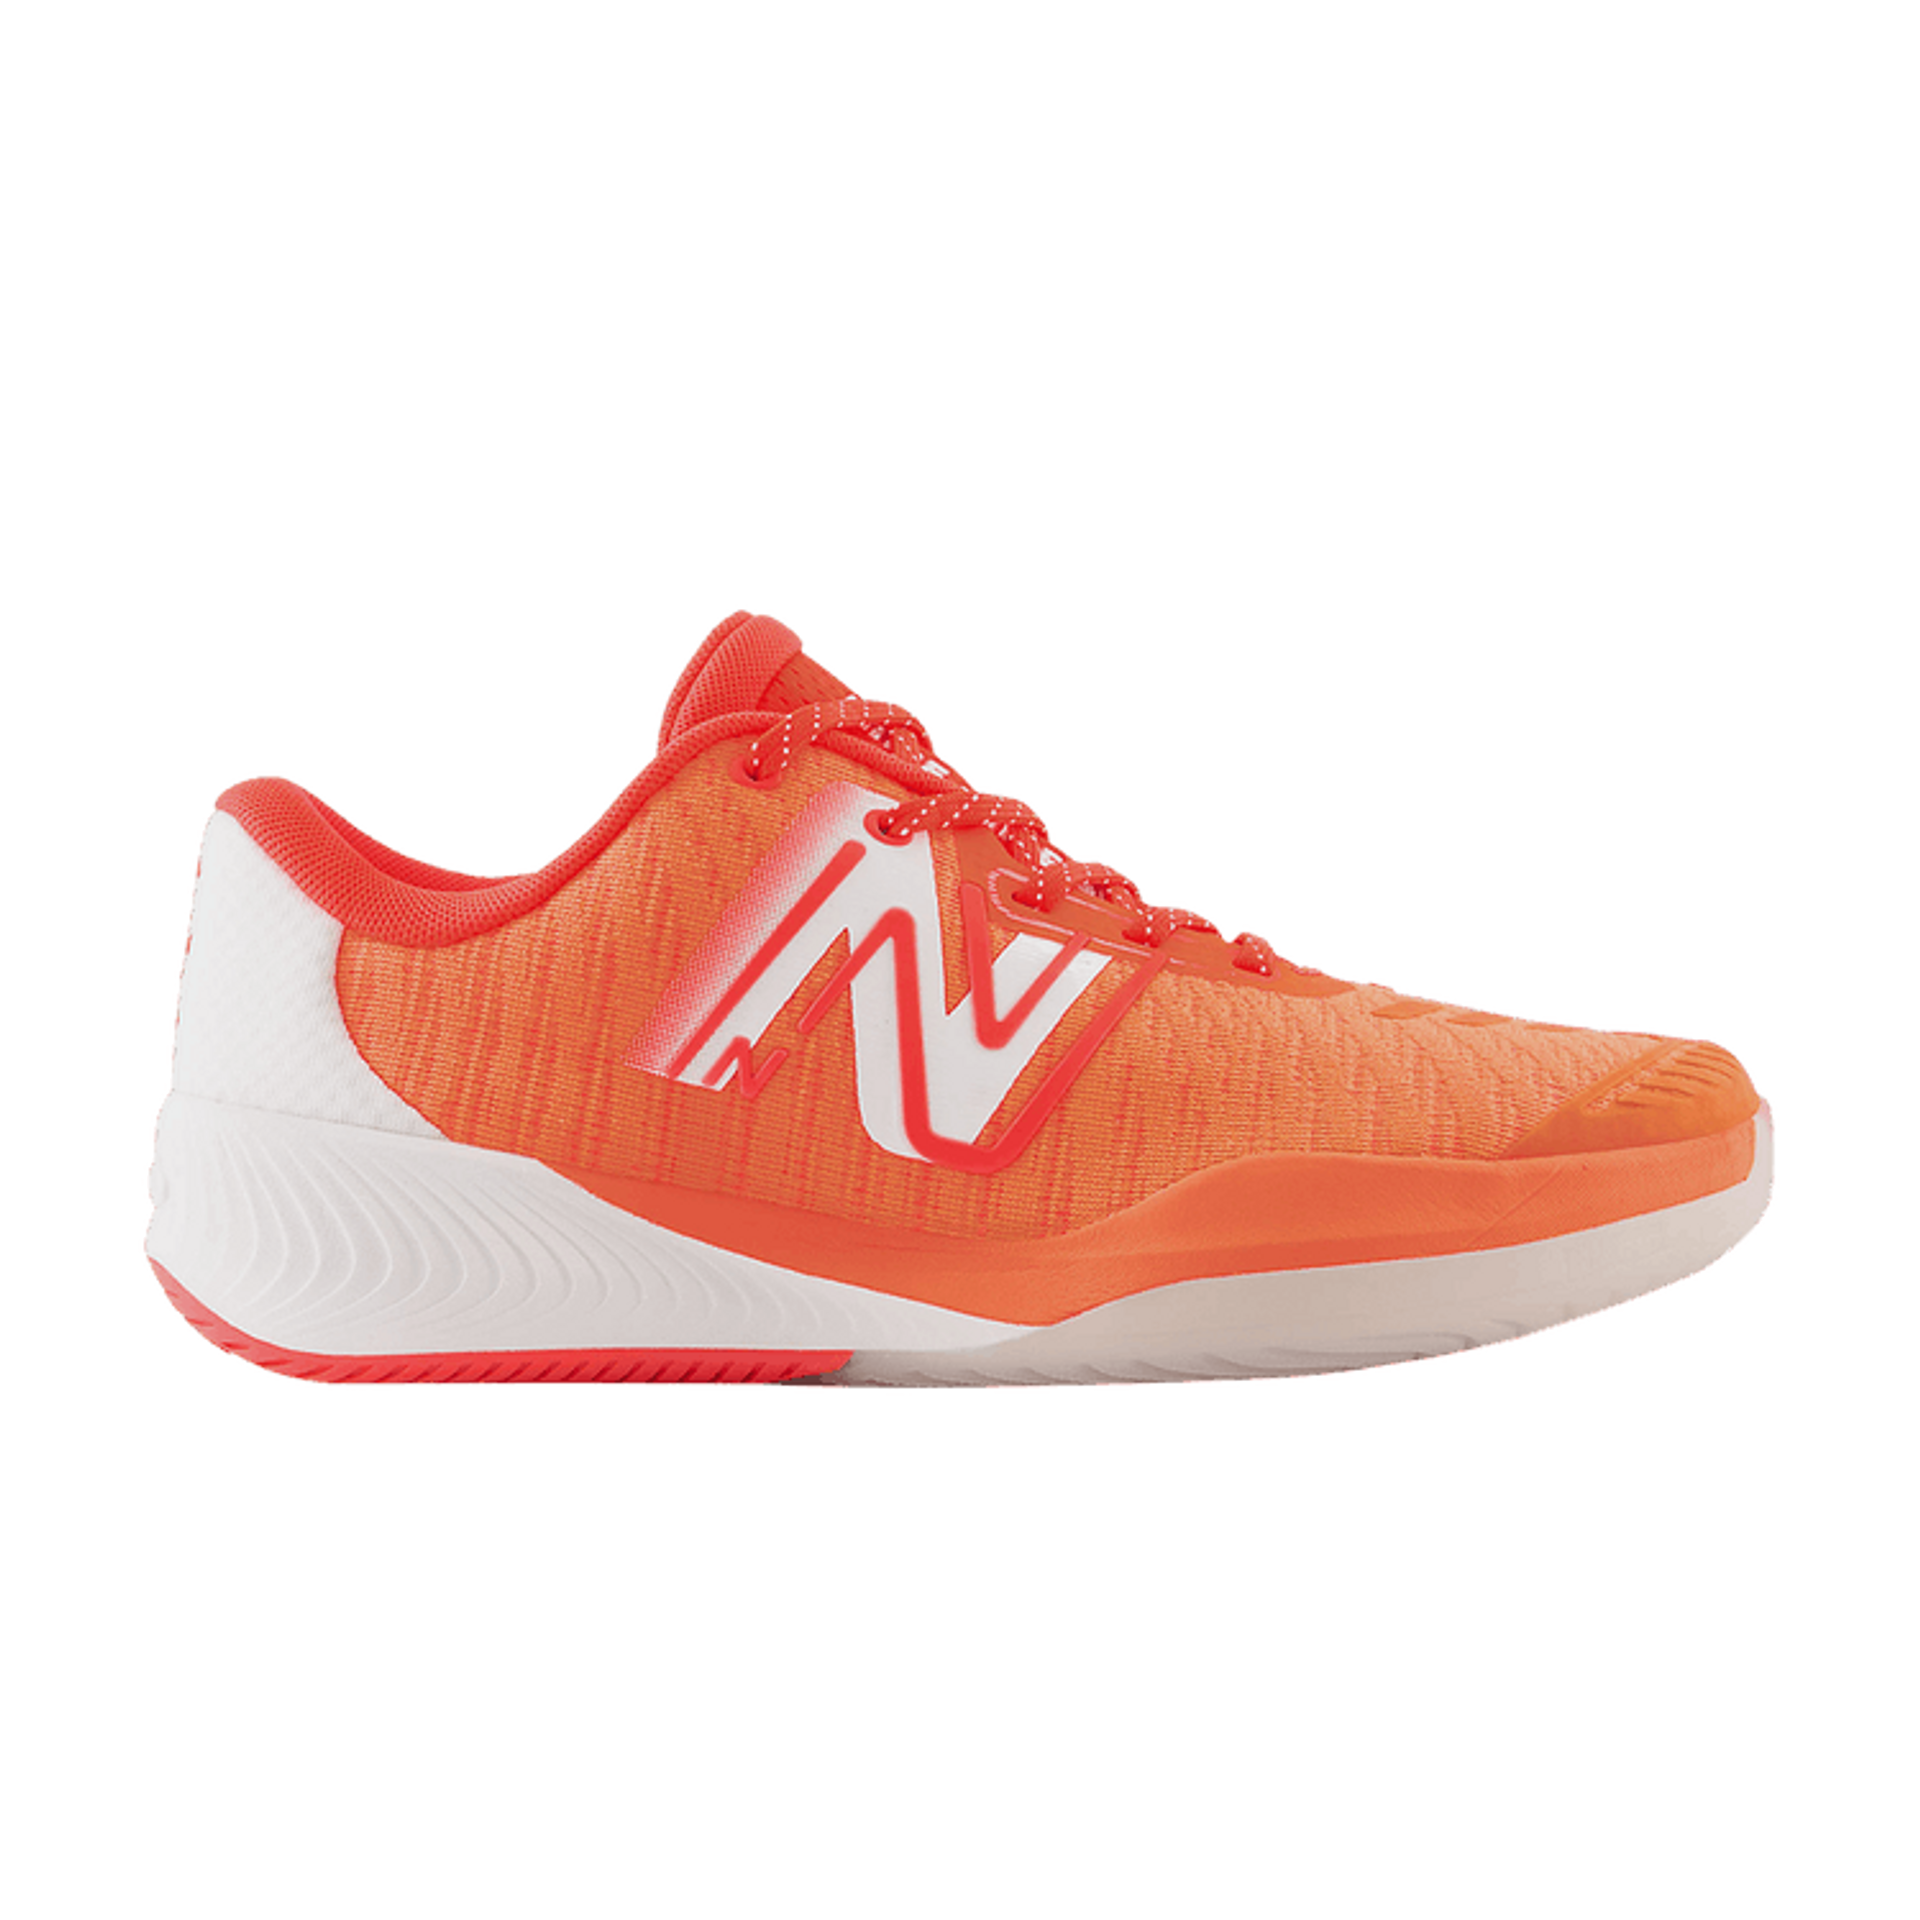 Wmns Fuel Cell 996v5 'Neon Dragonfly'